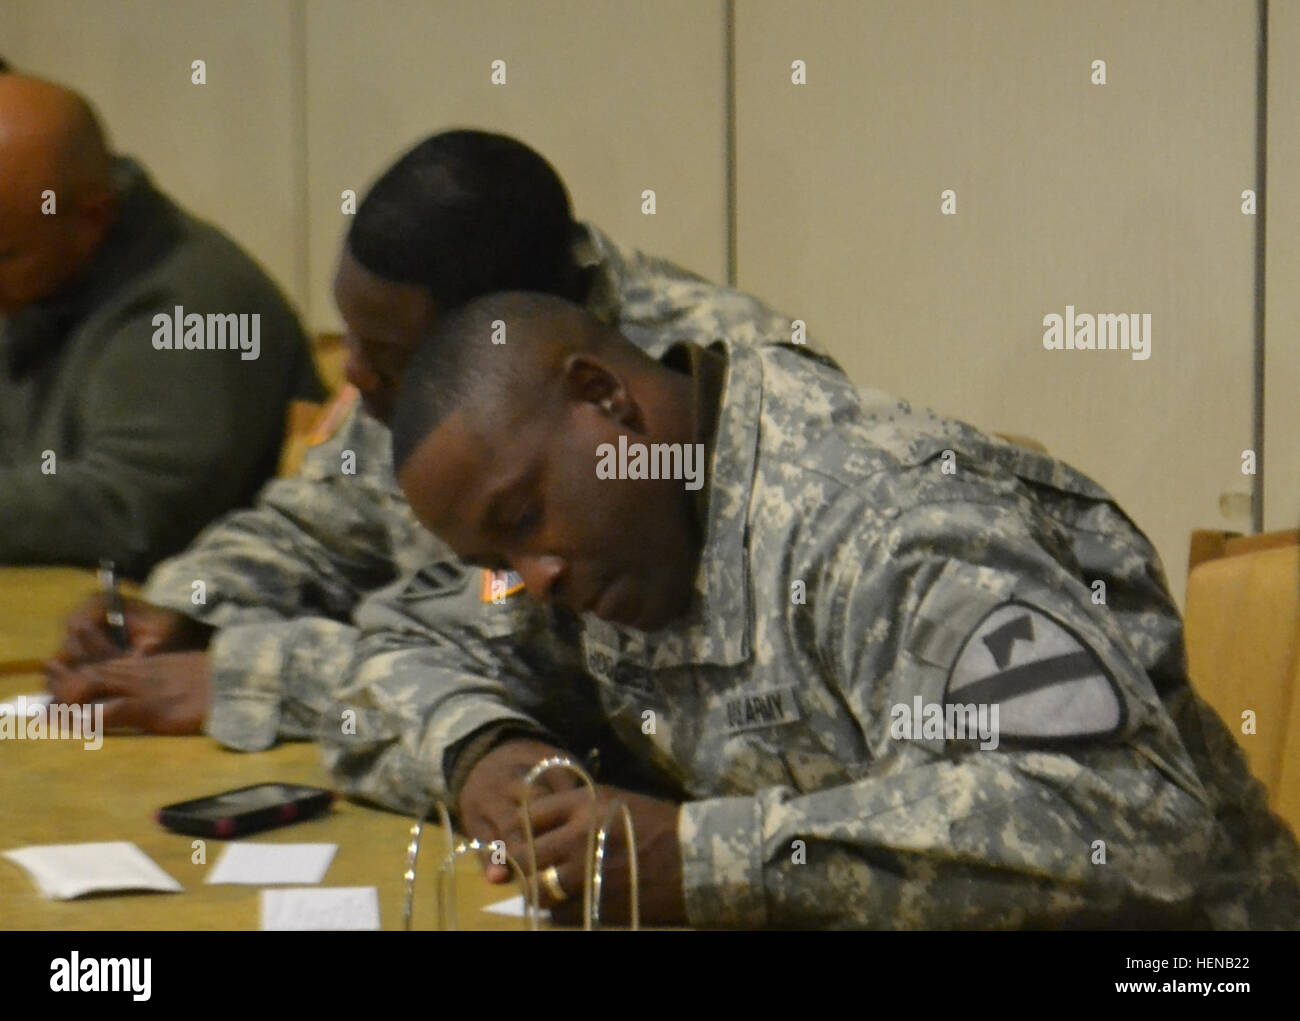 Staff Sgt. Jameel Hodges, a transportation platoon sergeant for Alpha Distribution Company 125th Brigade Support Battalion, 3rd Brigade Combat Team, 1st Cavalry Division, takes notes at the noncommissioned officer development program Jan. 29, at the Operation Iraqi Freedom Dining Facility on Fort Hood, Texas (U.S. Army photographed by Spc. Genesia Zanardi HHC, 215th BSB UPAR, 3rd BCT, 1st Cav. Div.) Blacksmiths enforcing and executing 140129-A-XX000-003 Stock Photo